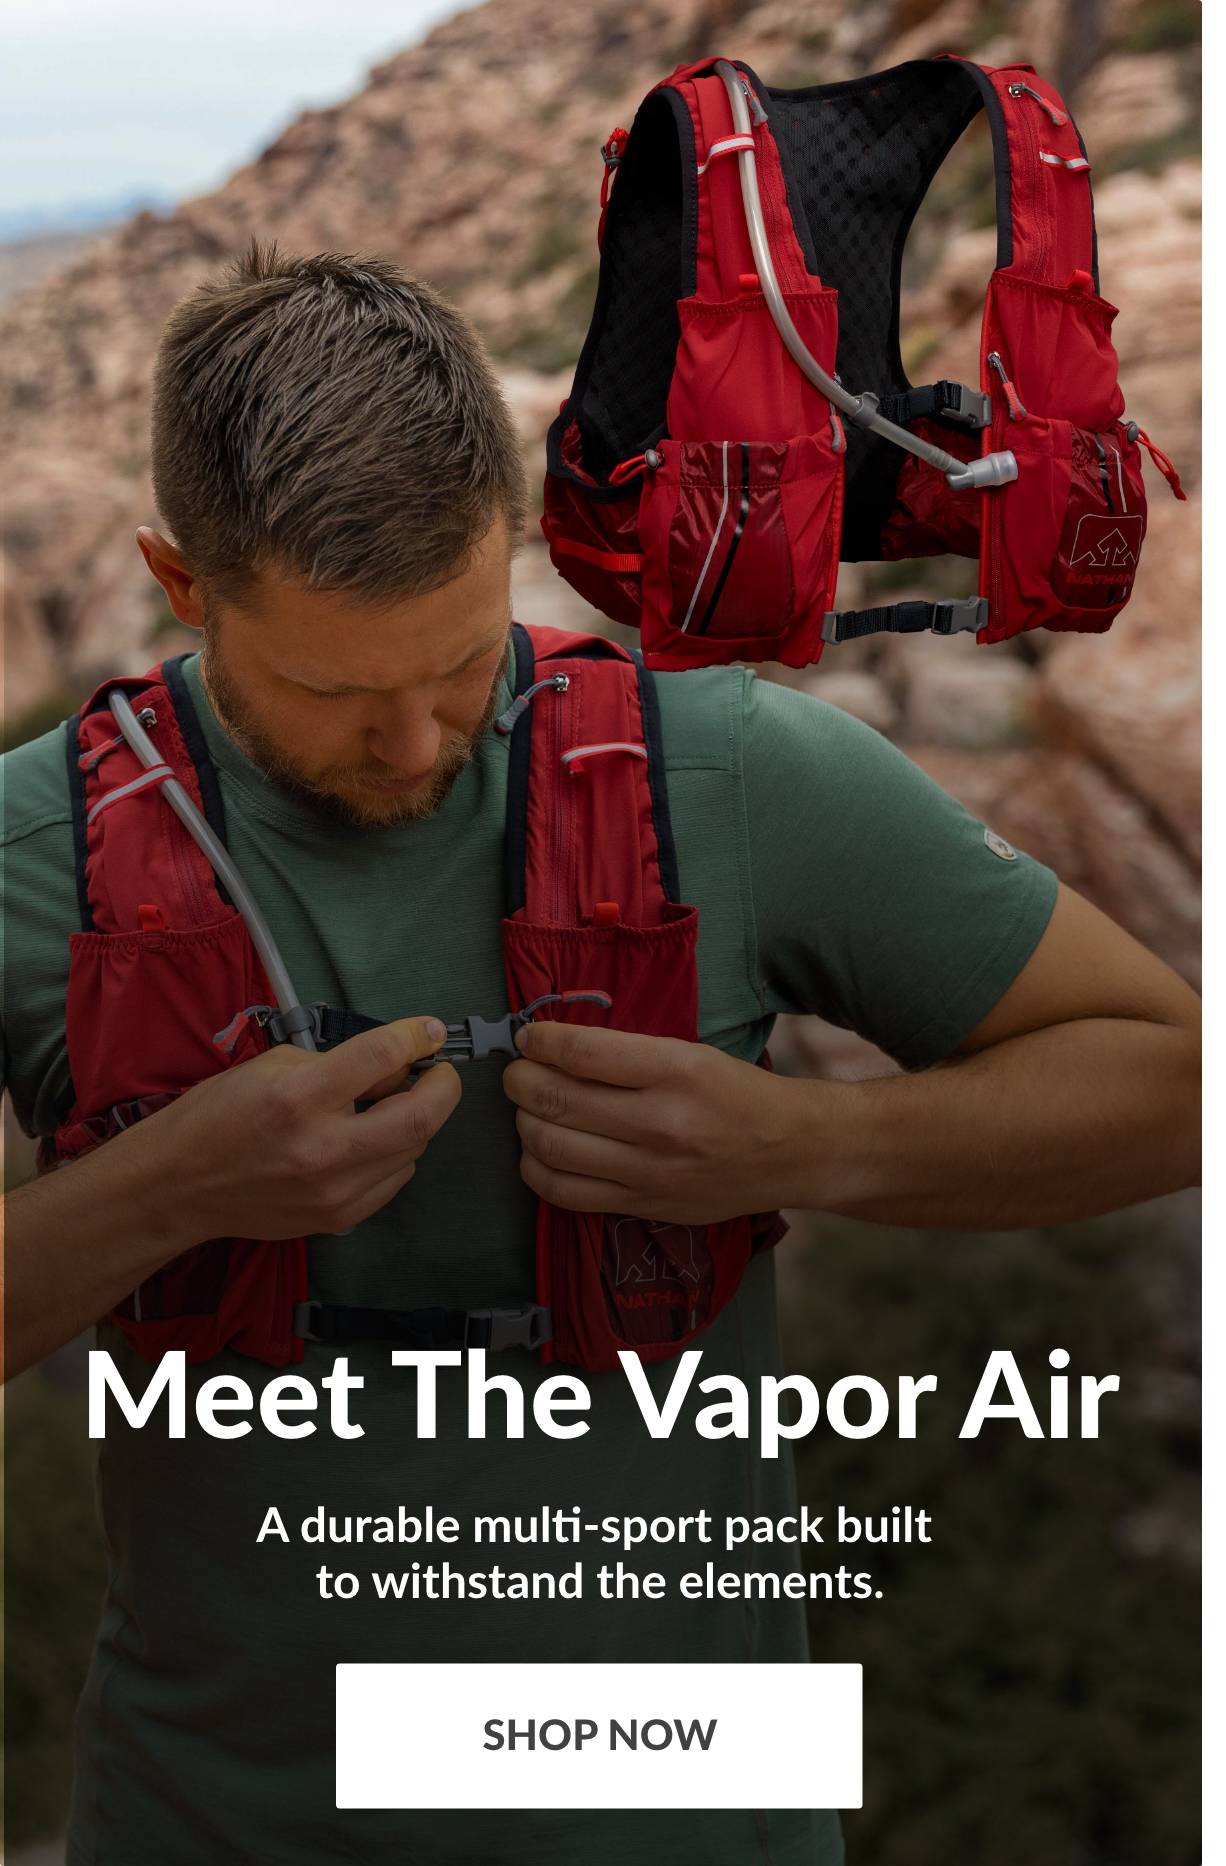 Meet The Vapor Air. A durable multi-sport pack built to withstand the elements. SHOP NOW